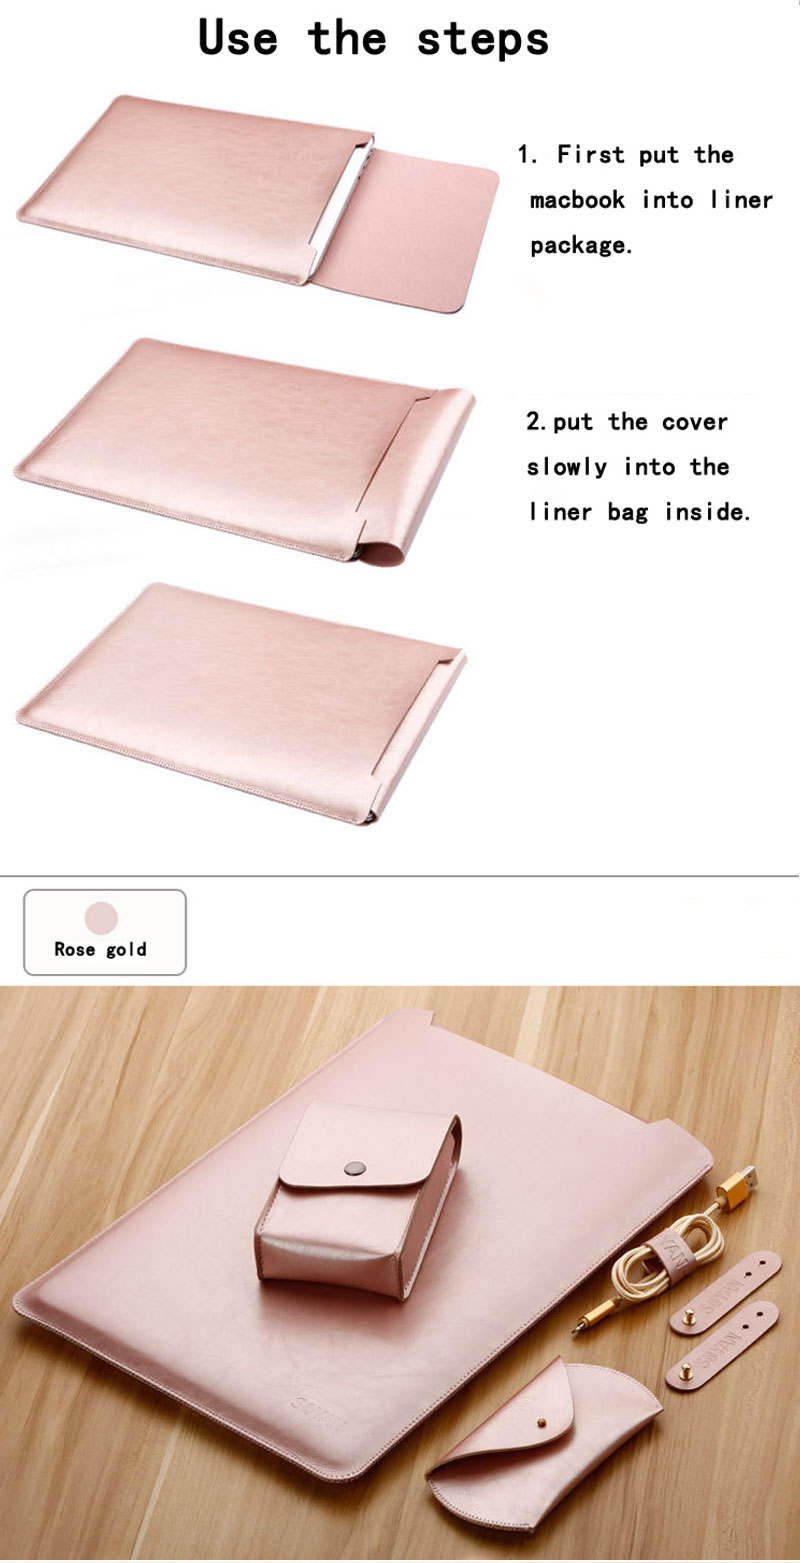 1-Set-Waterproof-Notebook-Sleeve-156-inch-PU-Leather-Laptop-Bag-Case-Cover-For-Xiaomi-Air-Notebook-1257963